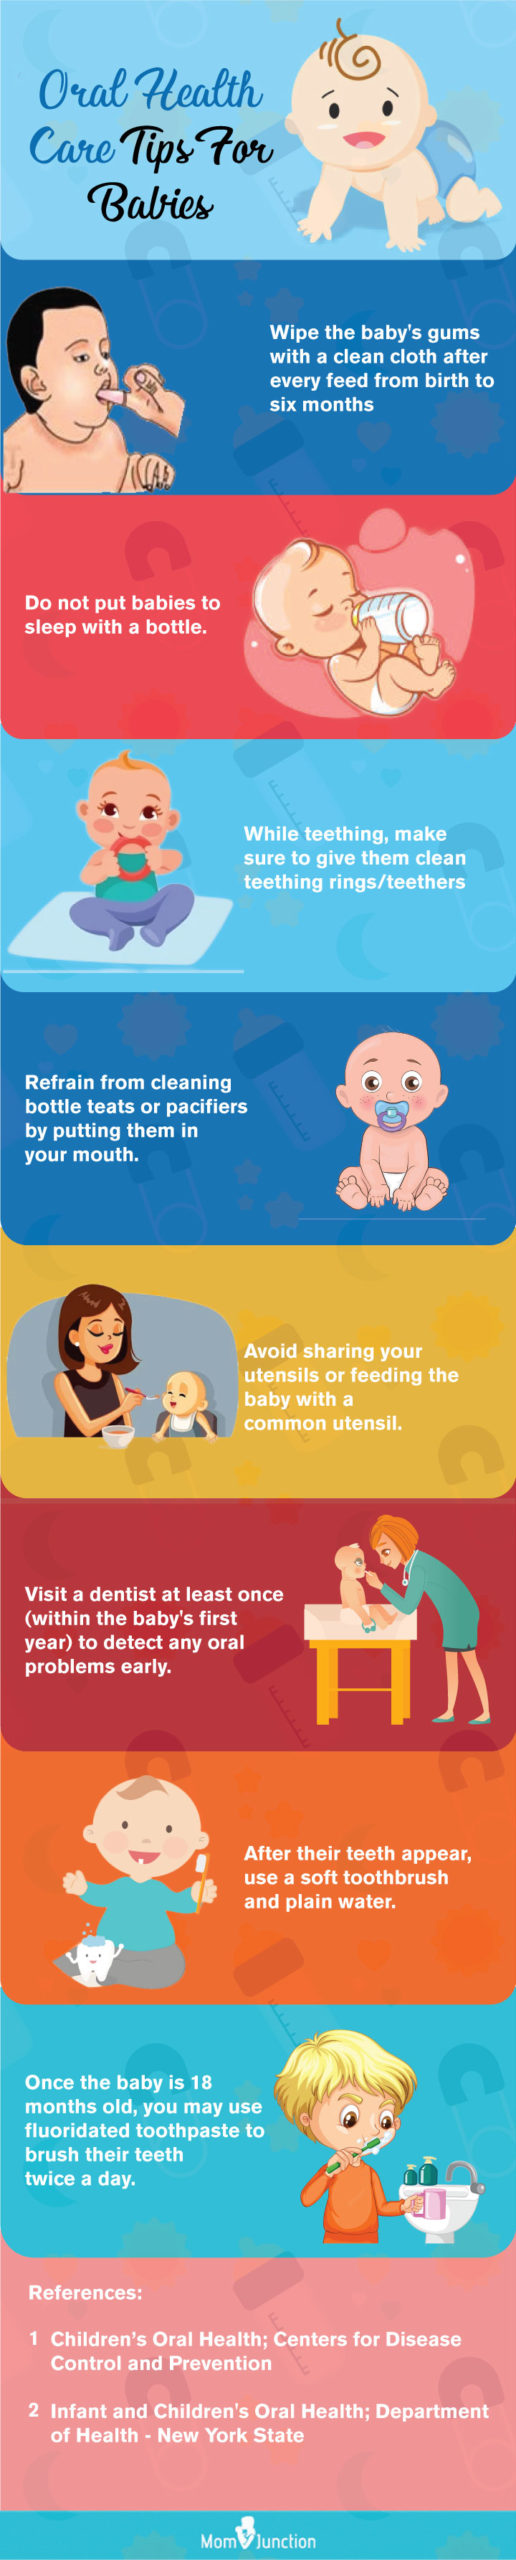 oral health care tips for babies (infographic)